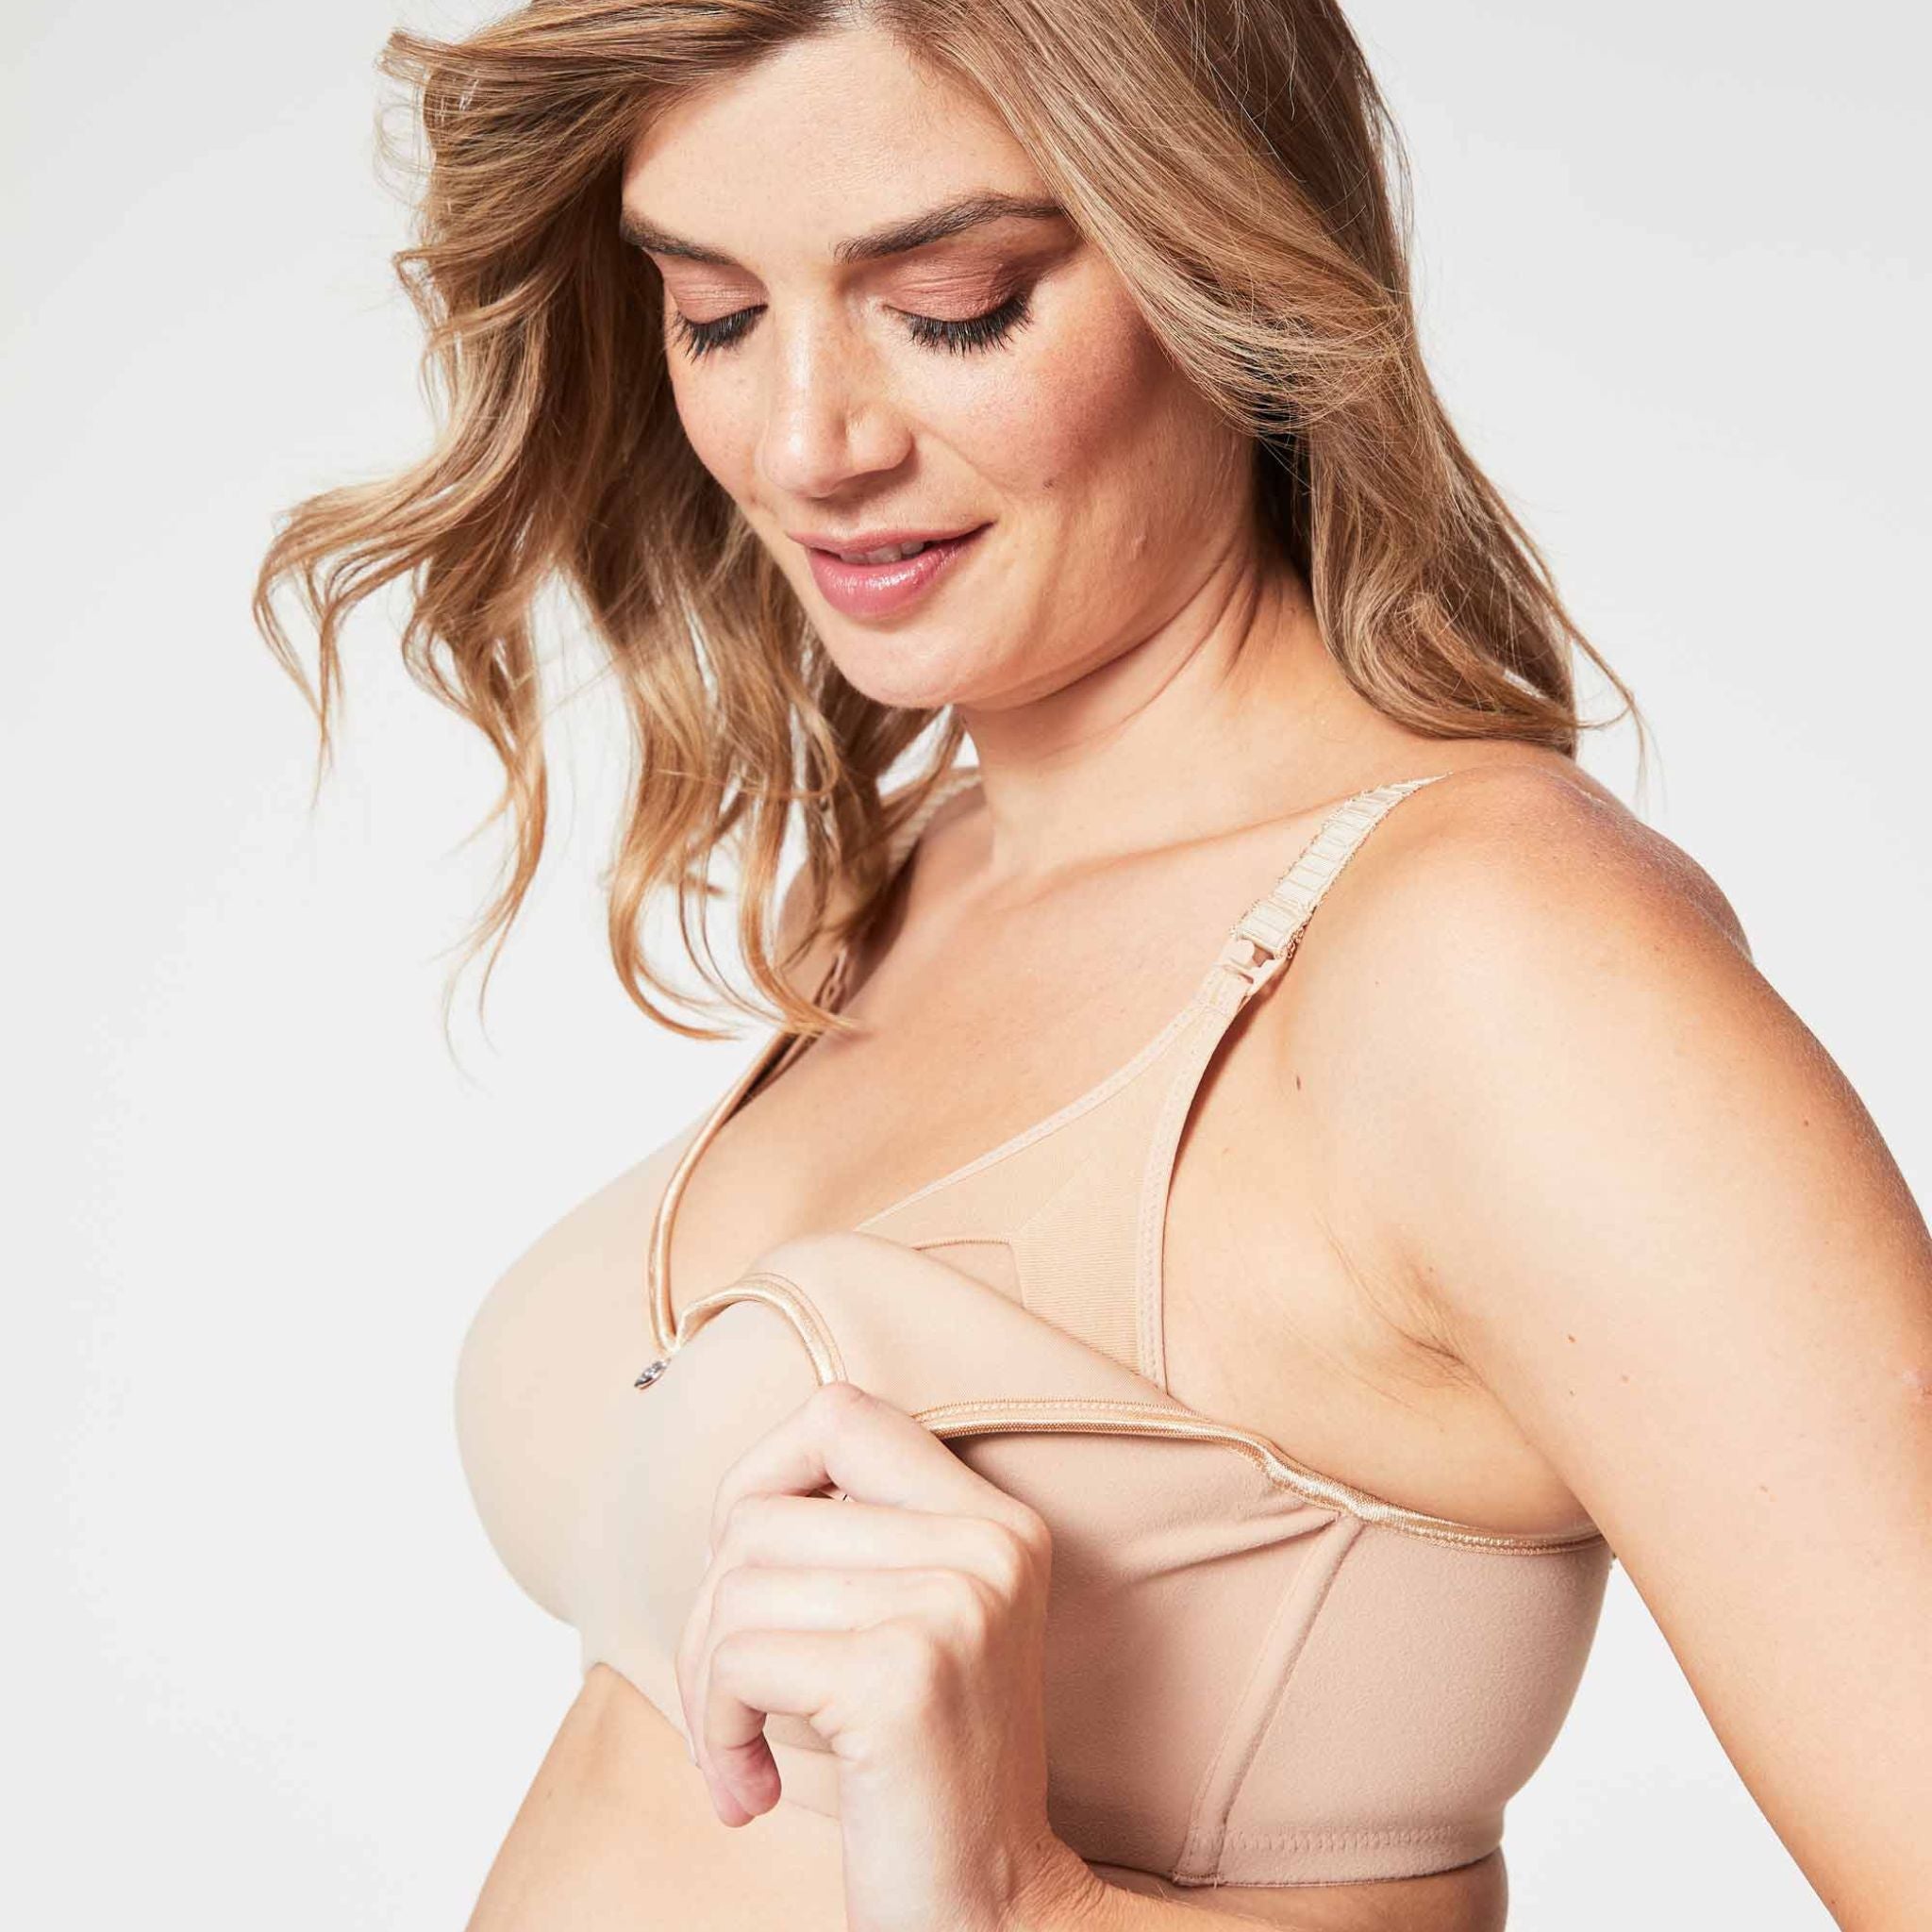 The perfect everyday bra, with flavour! It’s hard to go past this this lightly contoured spacer bra, with flexible wire that provides the wearer with versatility, a smooth profile, great shape, comfort and superior sup- port without the bulkiness of foam. The perfect t-shirt bra, with a few tantalising feature details that will be sure to surprise!